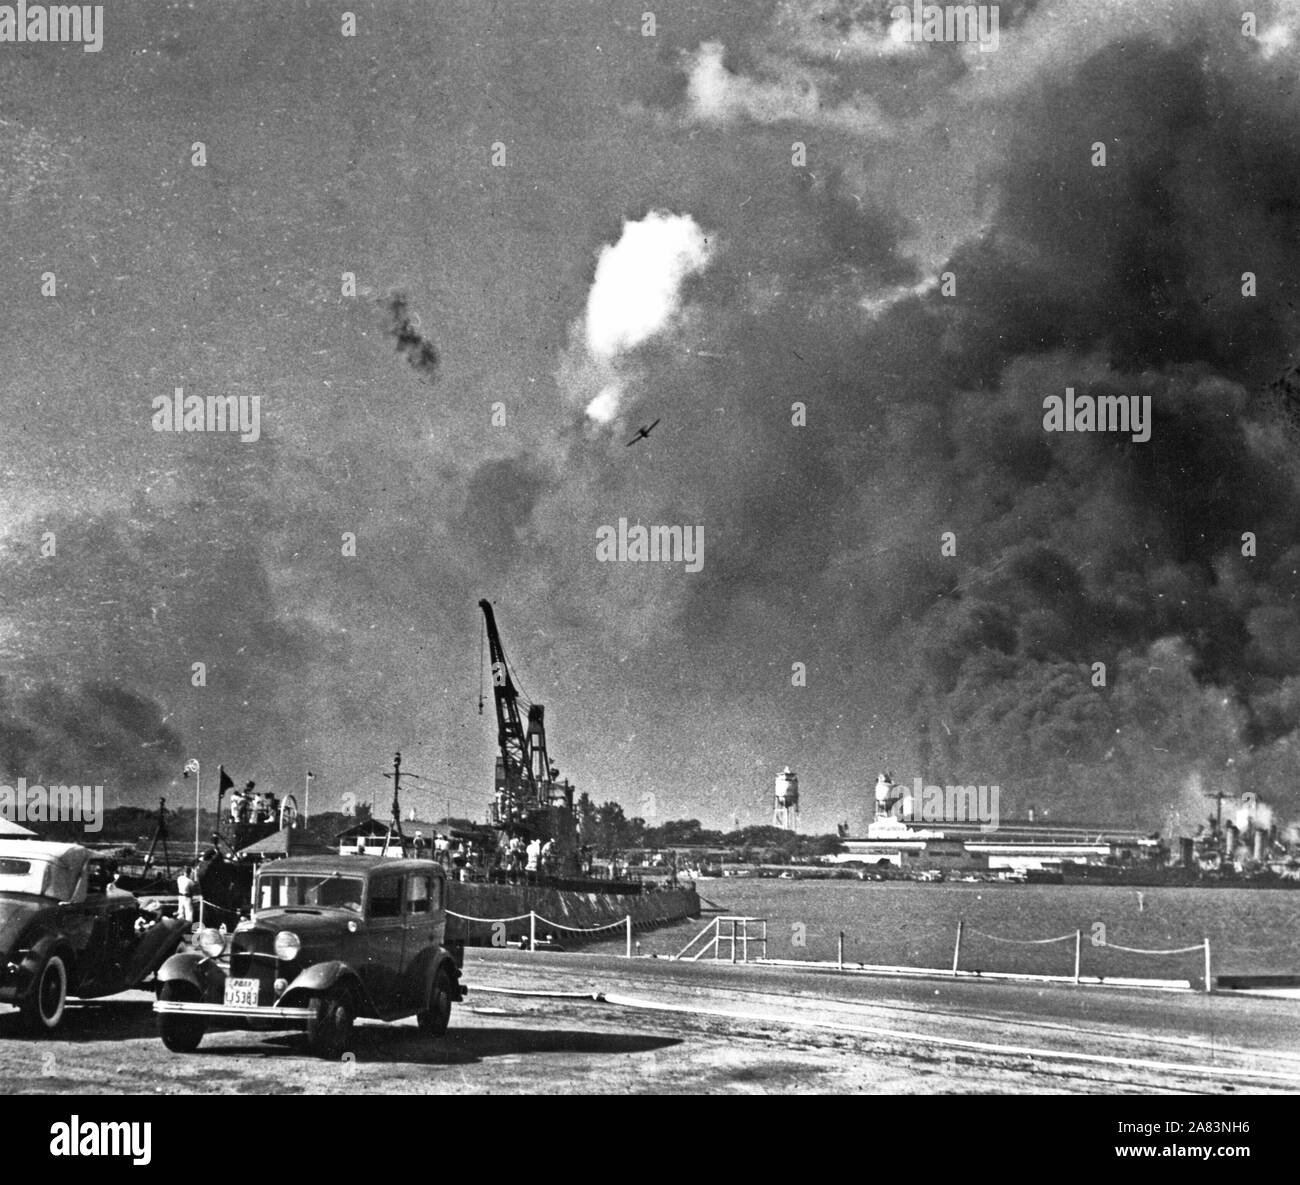 Japanese planes in action over Pearl Harbor, Dec. 7 1941. The USS Narwhal (SS167) in foreground was not hit. Stock Photo